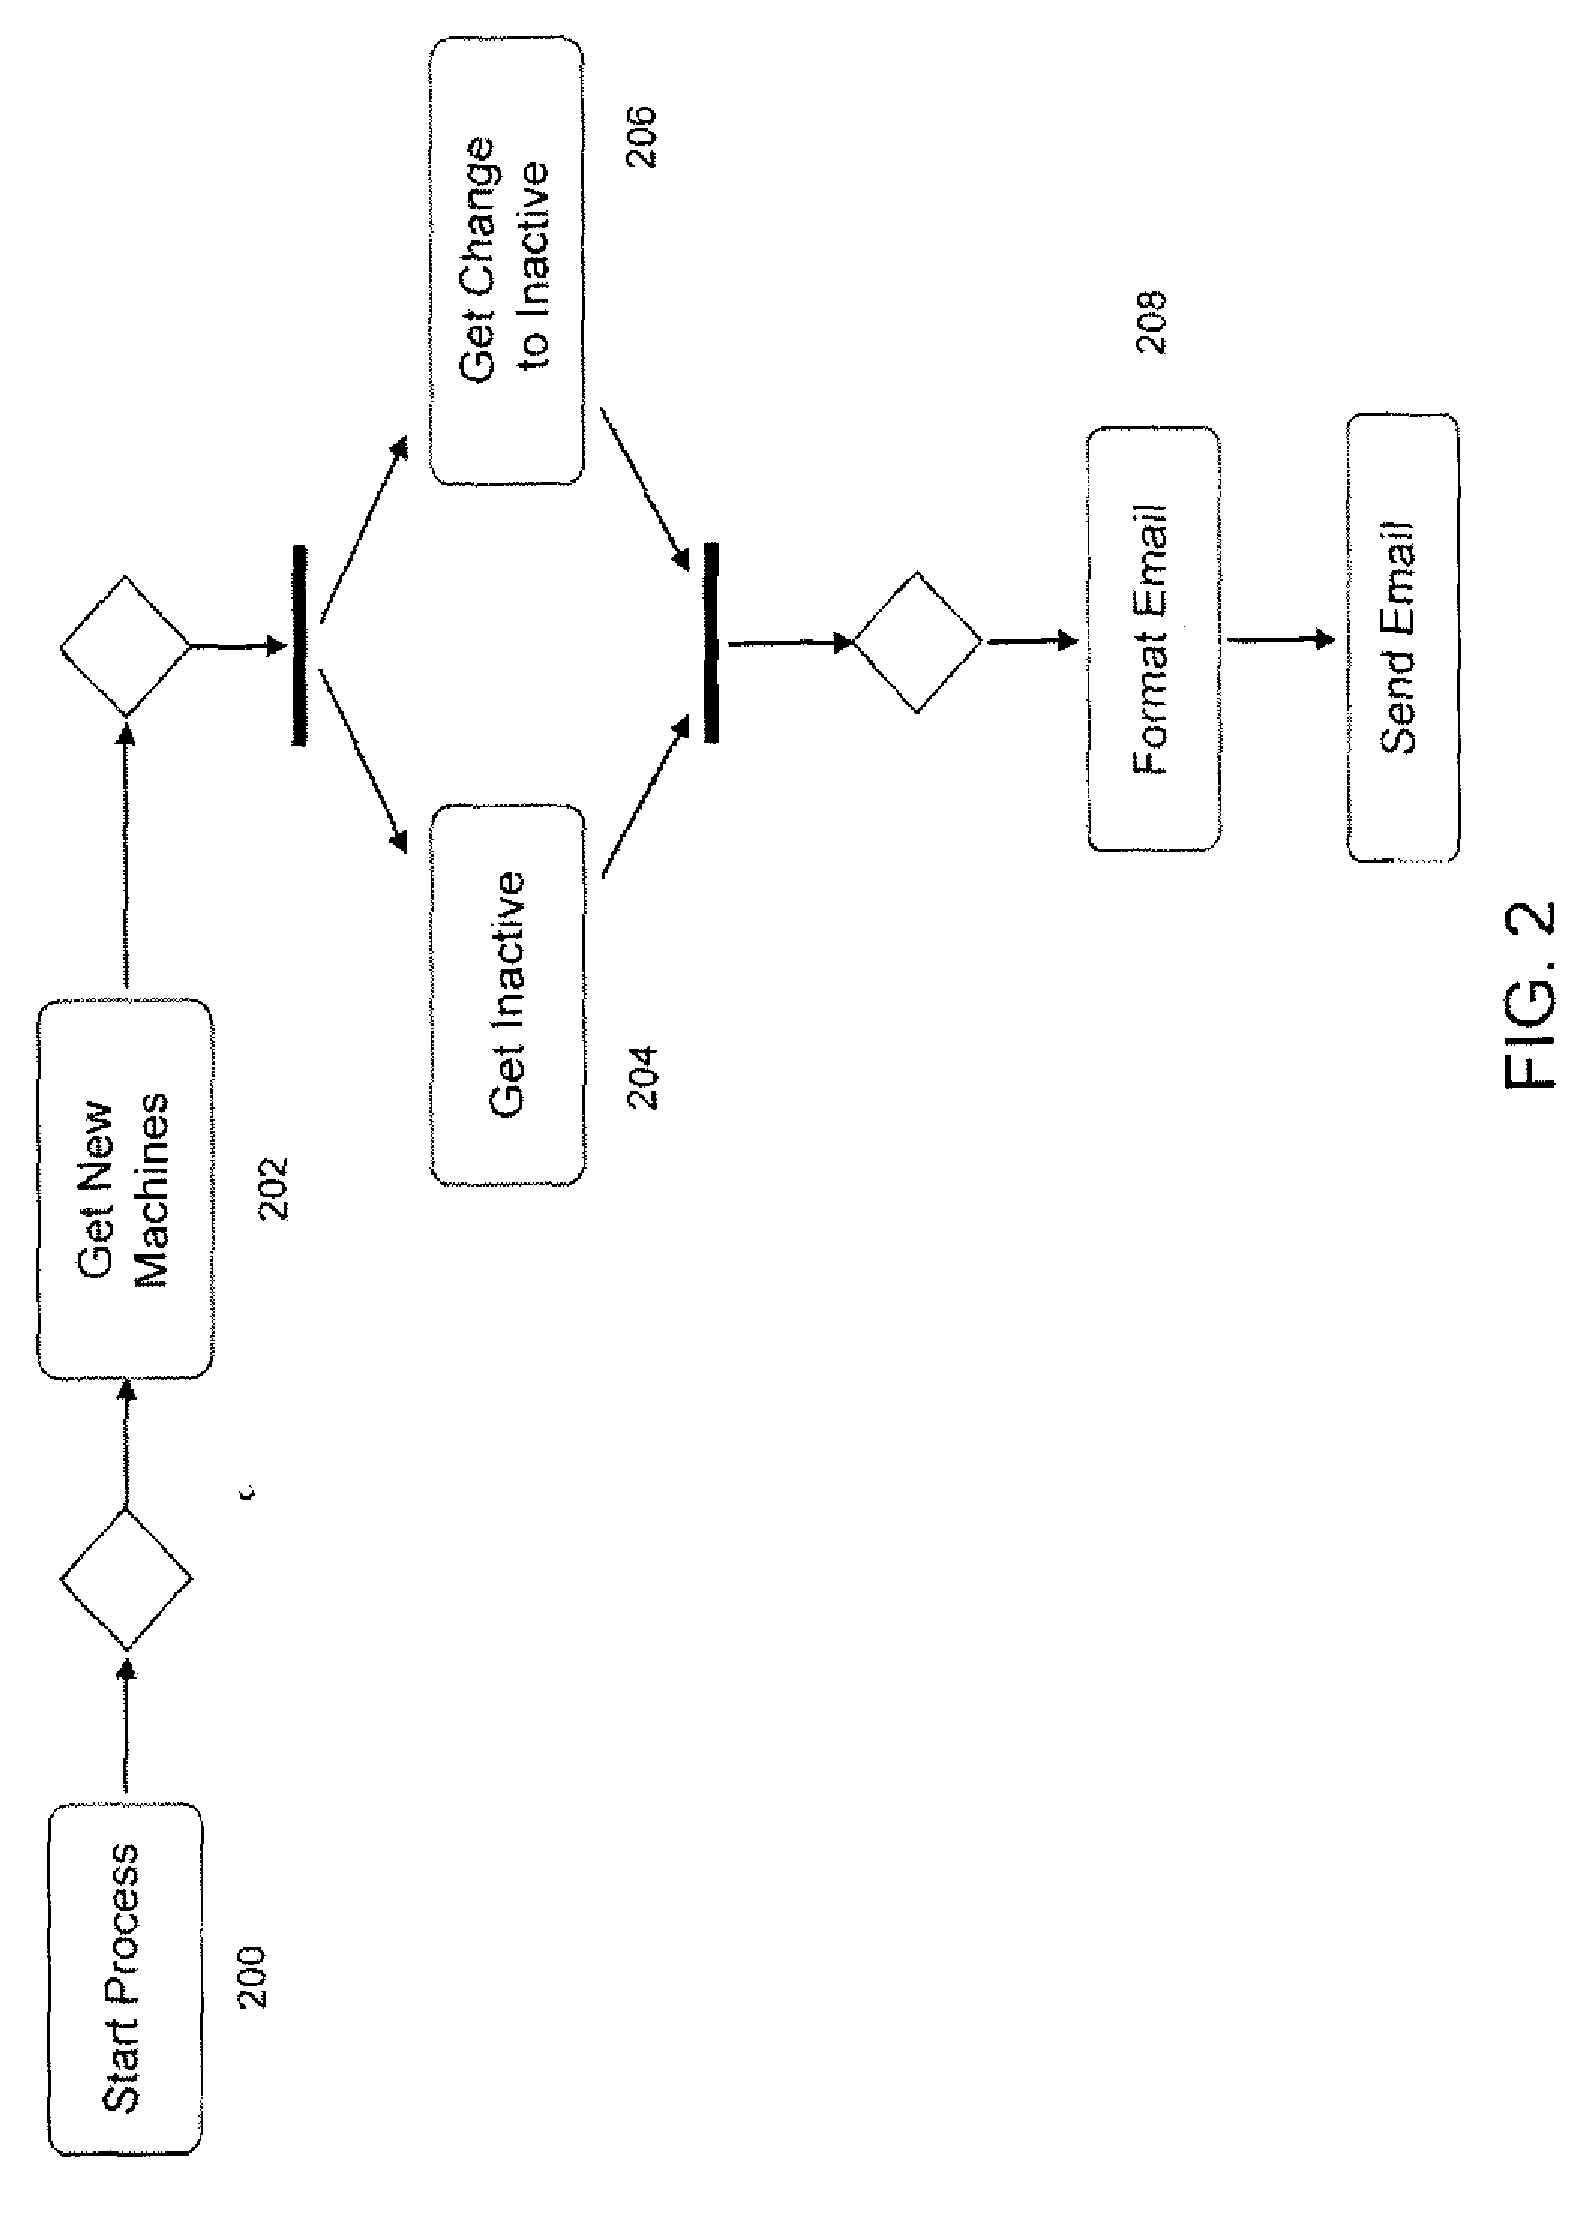 Method and Apparatus for Automated Monitoring of System Status